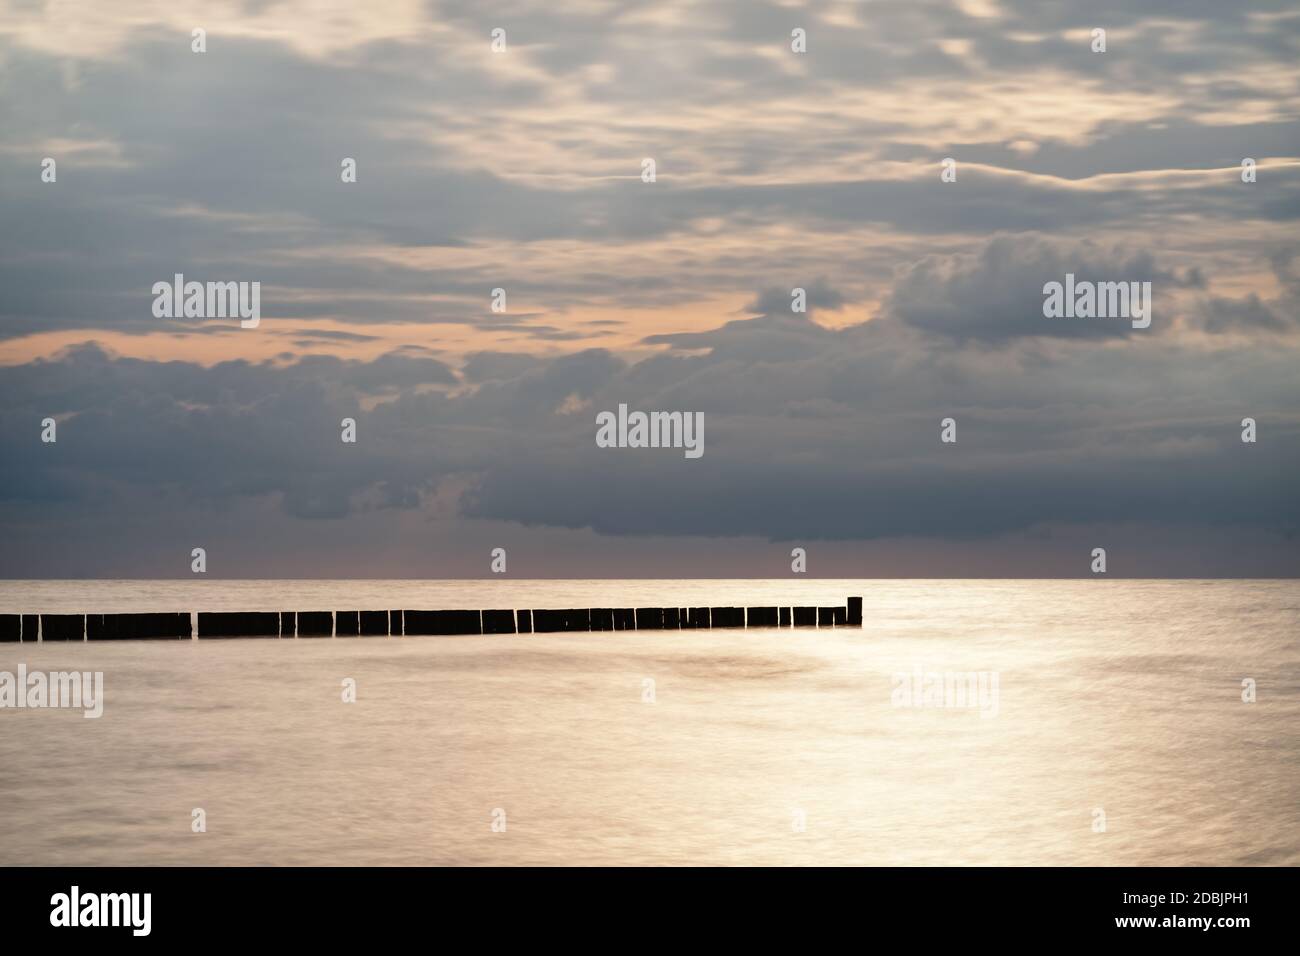 Quiet beach shot of the Baltic Sea coast with a row of groynes parallel to the horizon, the water surface is smoothed by long time exposure, light gre Stock Photo